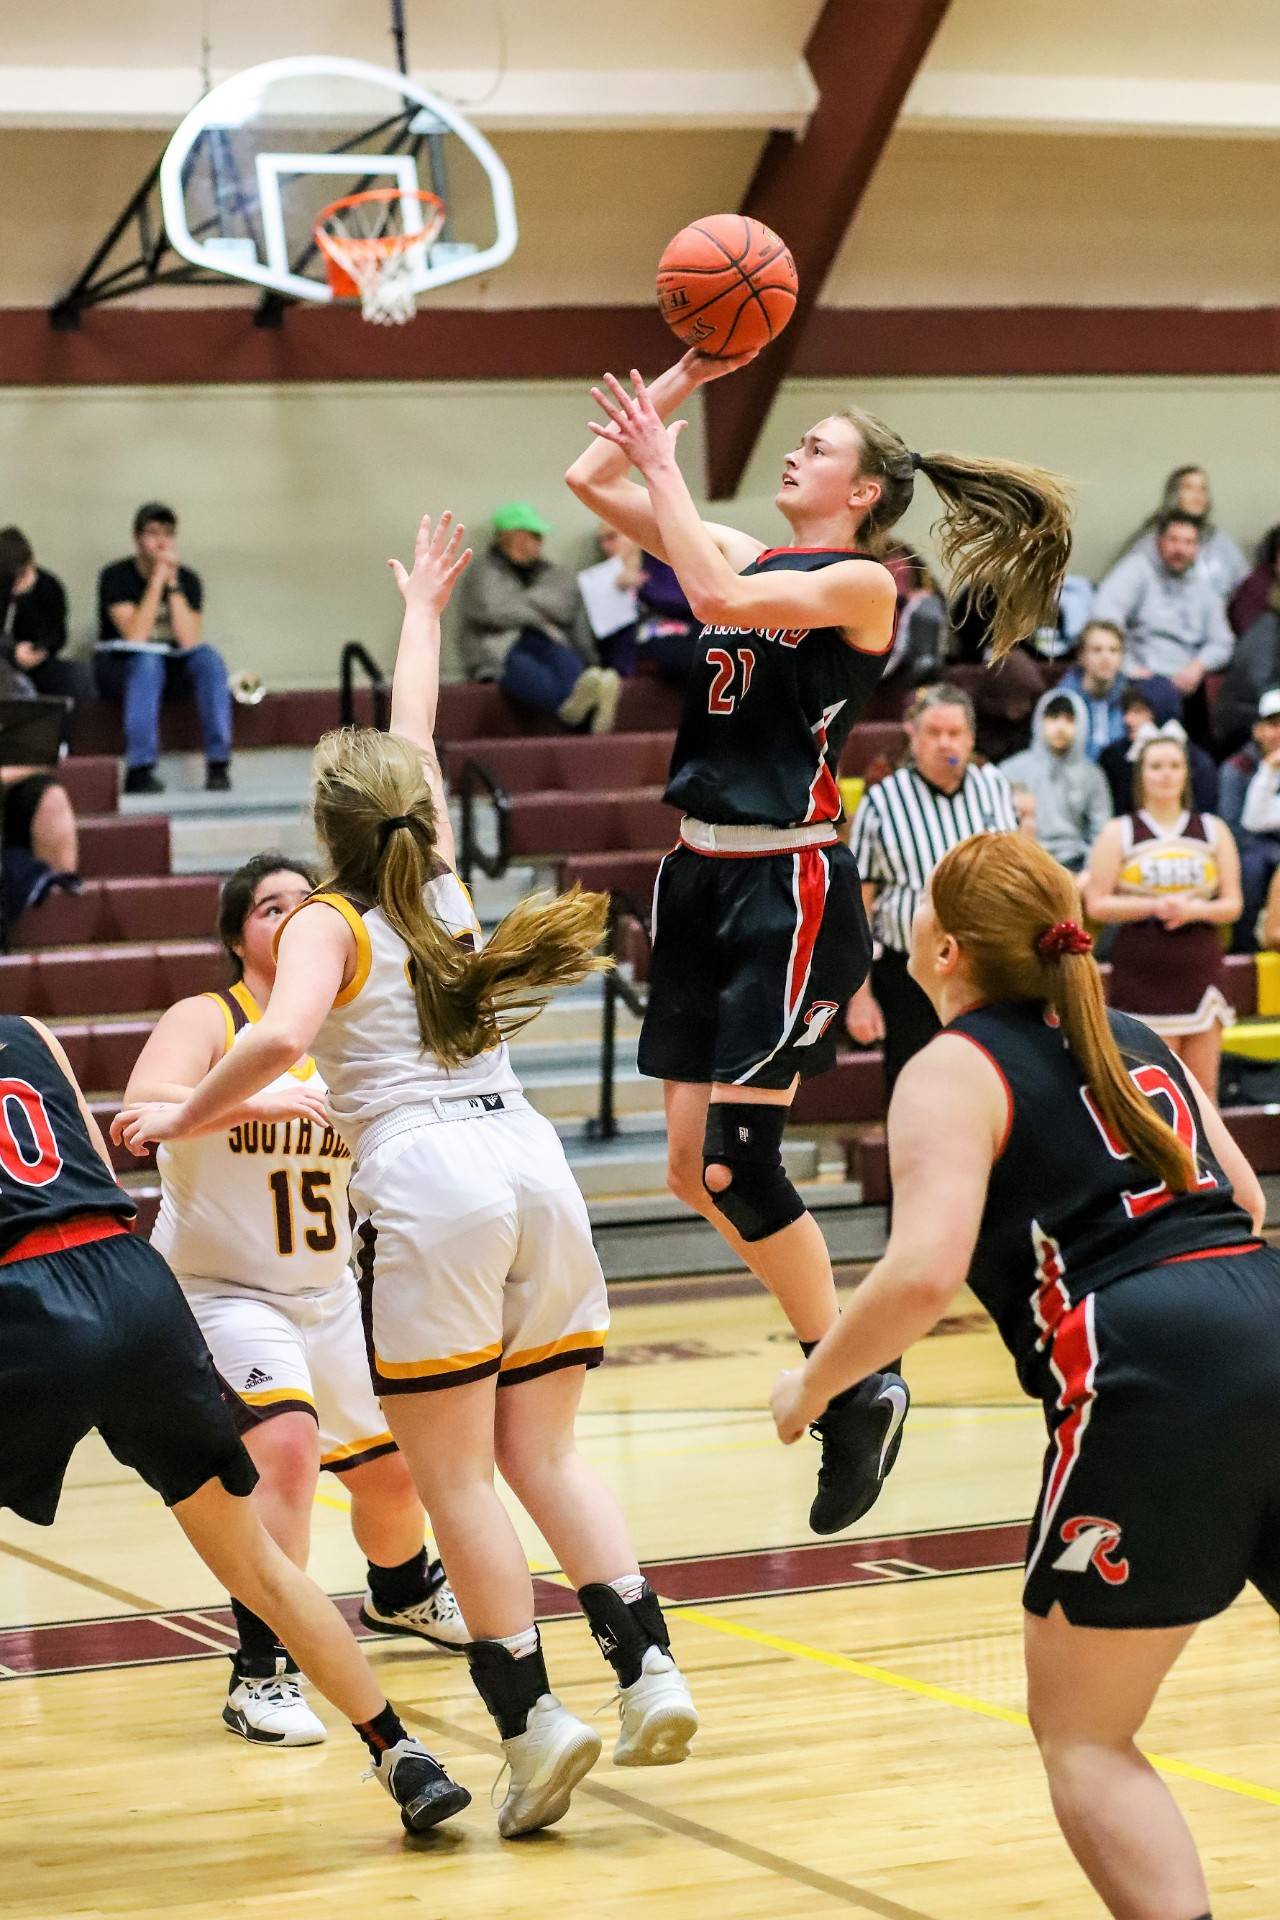 Raymond sophomore guard Kyra Gardner, seen here taking a jump shot against South Bend on Jan. 9, was named the 2B Pacific League MVP after leading the league in scoring at 24.1 points per game. (Photo by Larry Bale)